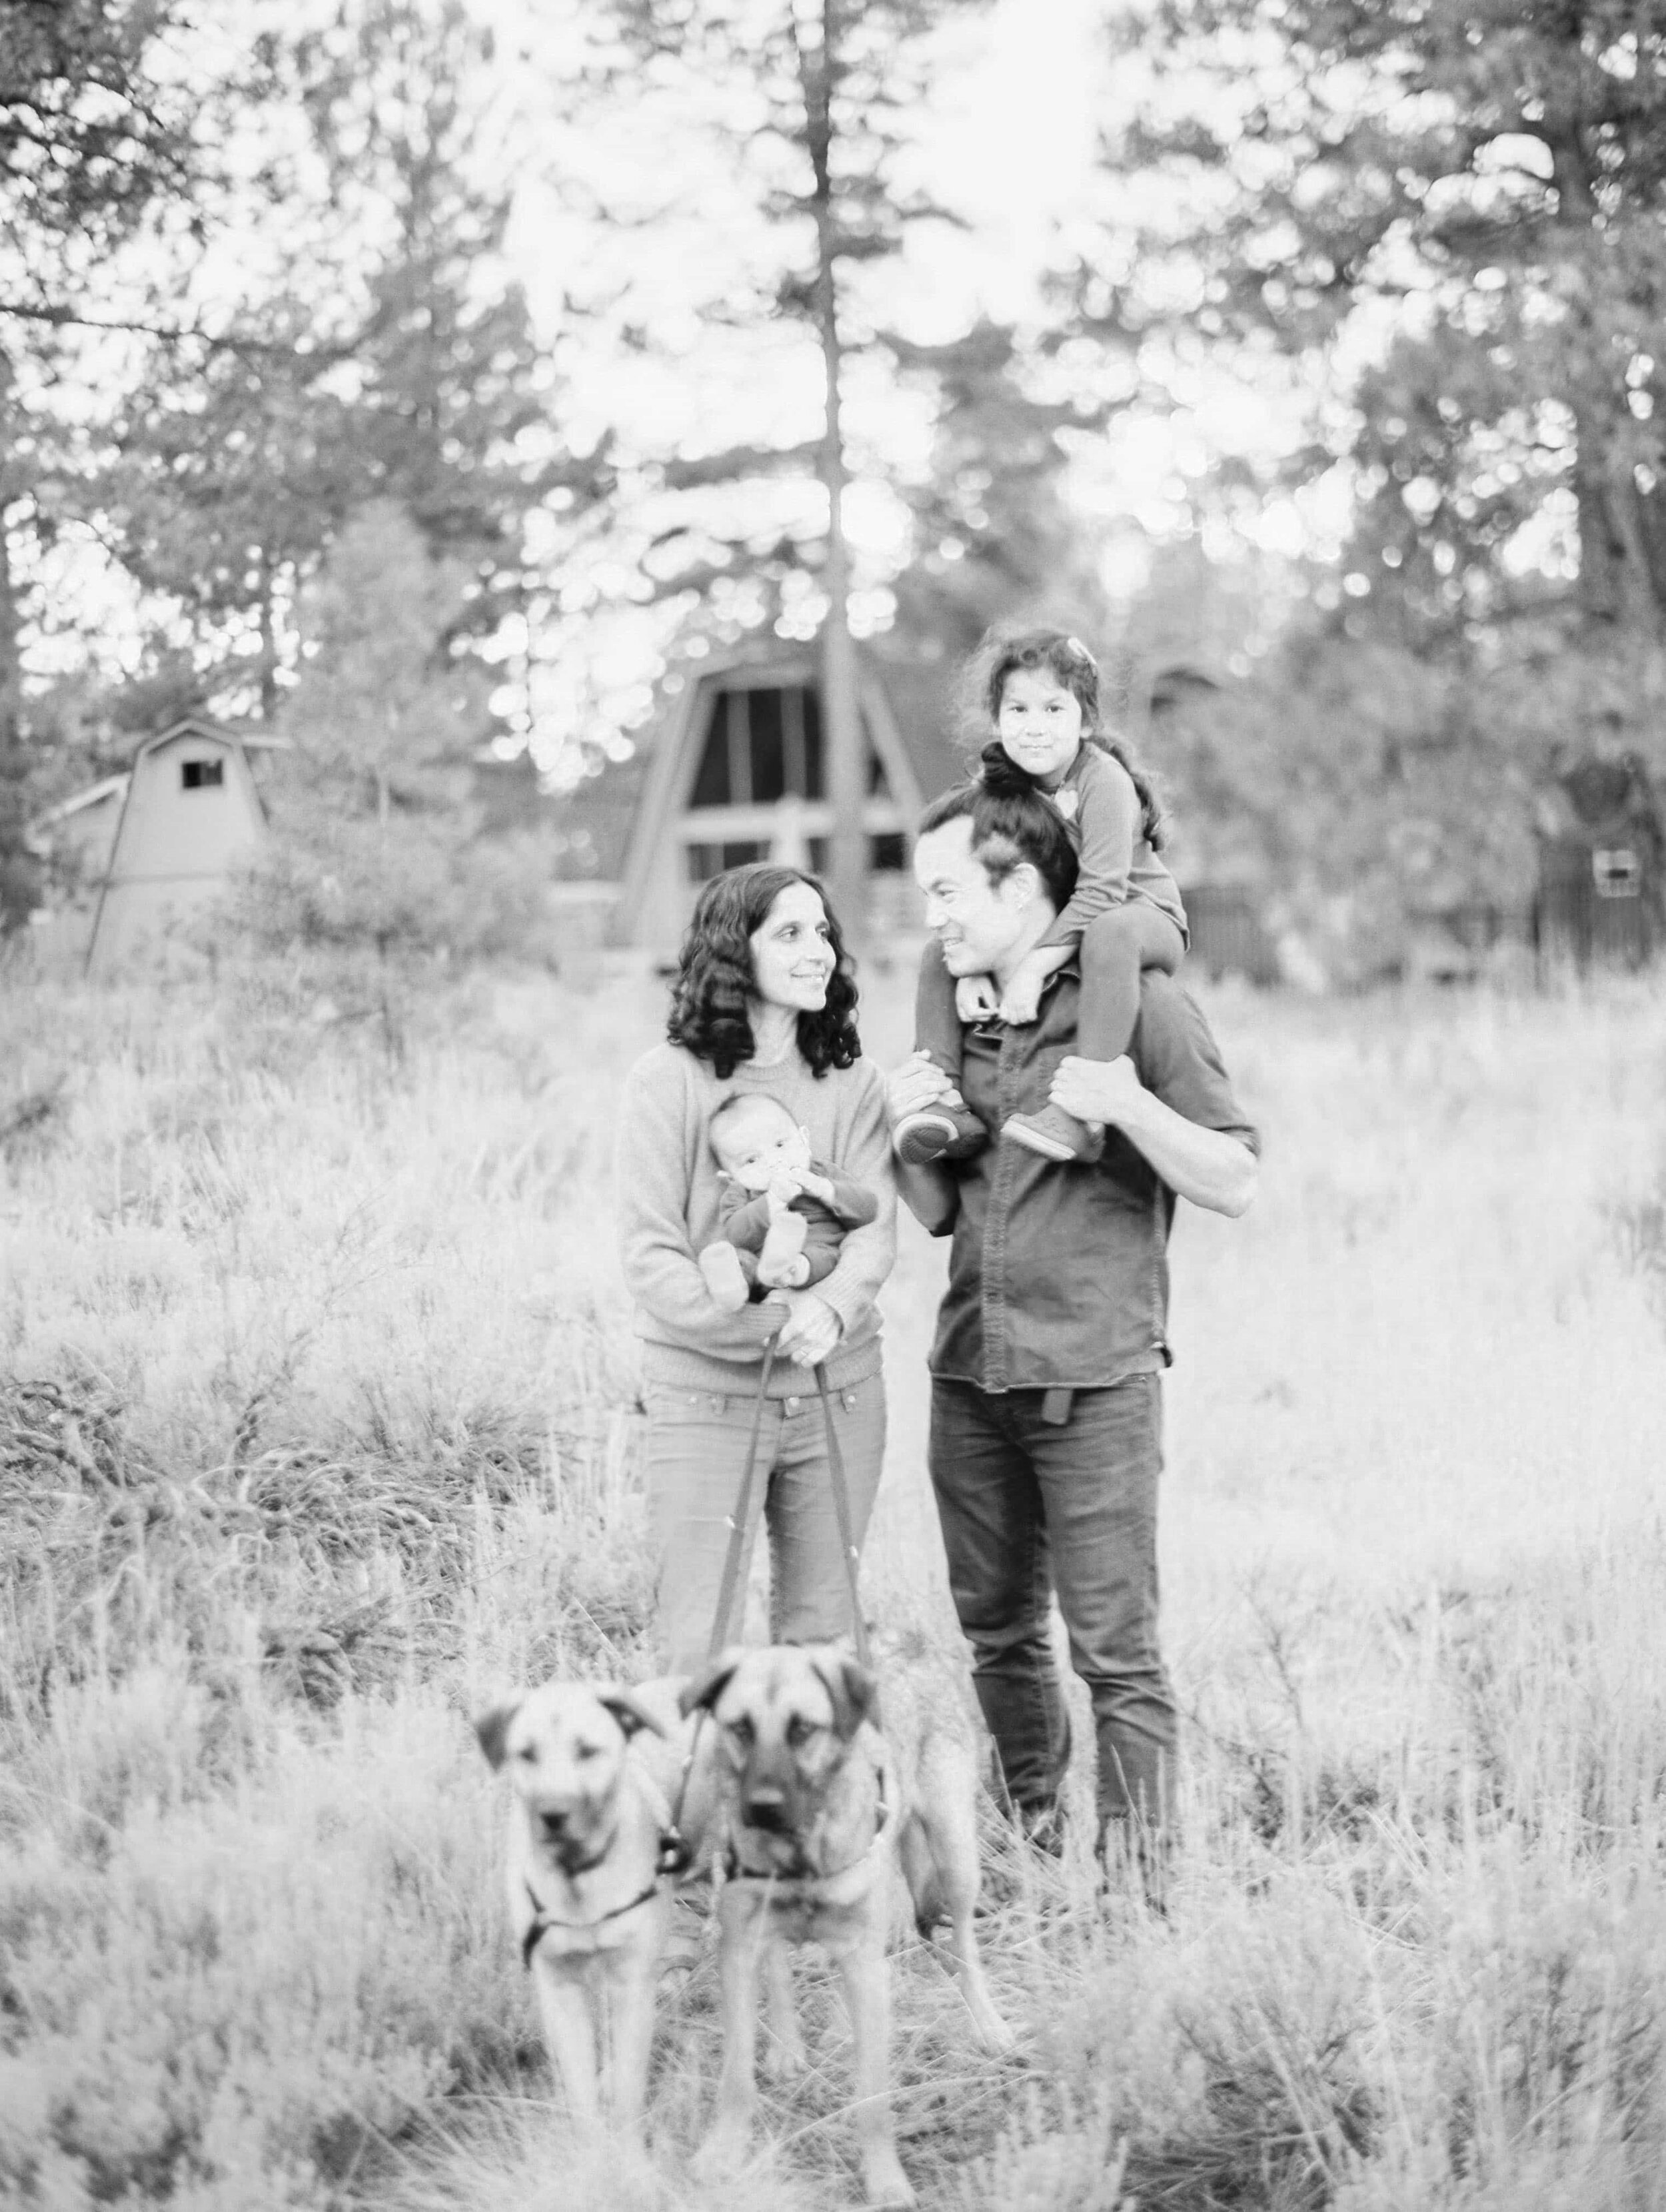 Burton and Trupti with Vera and dogs in truckee